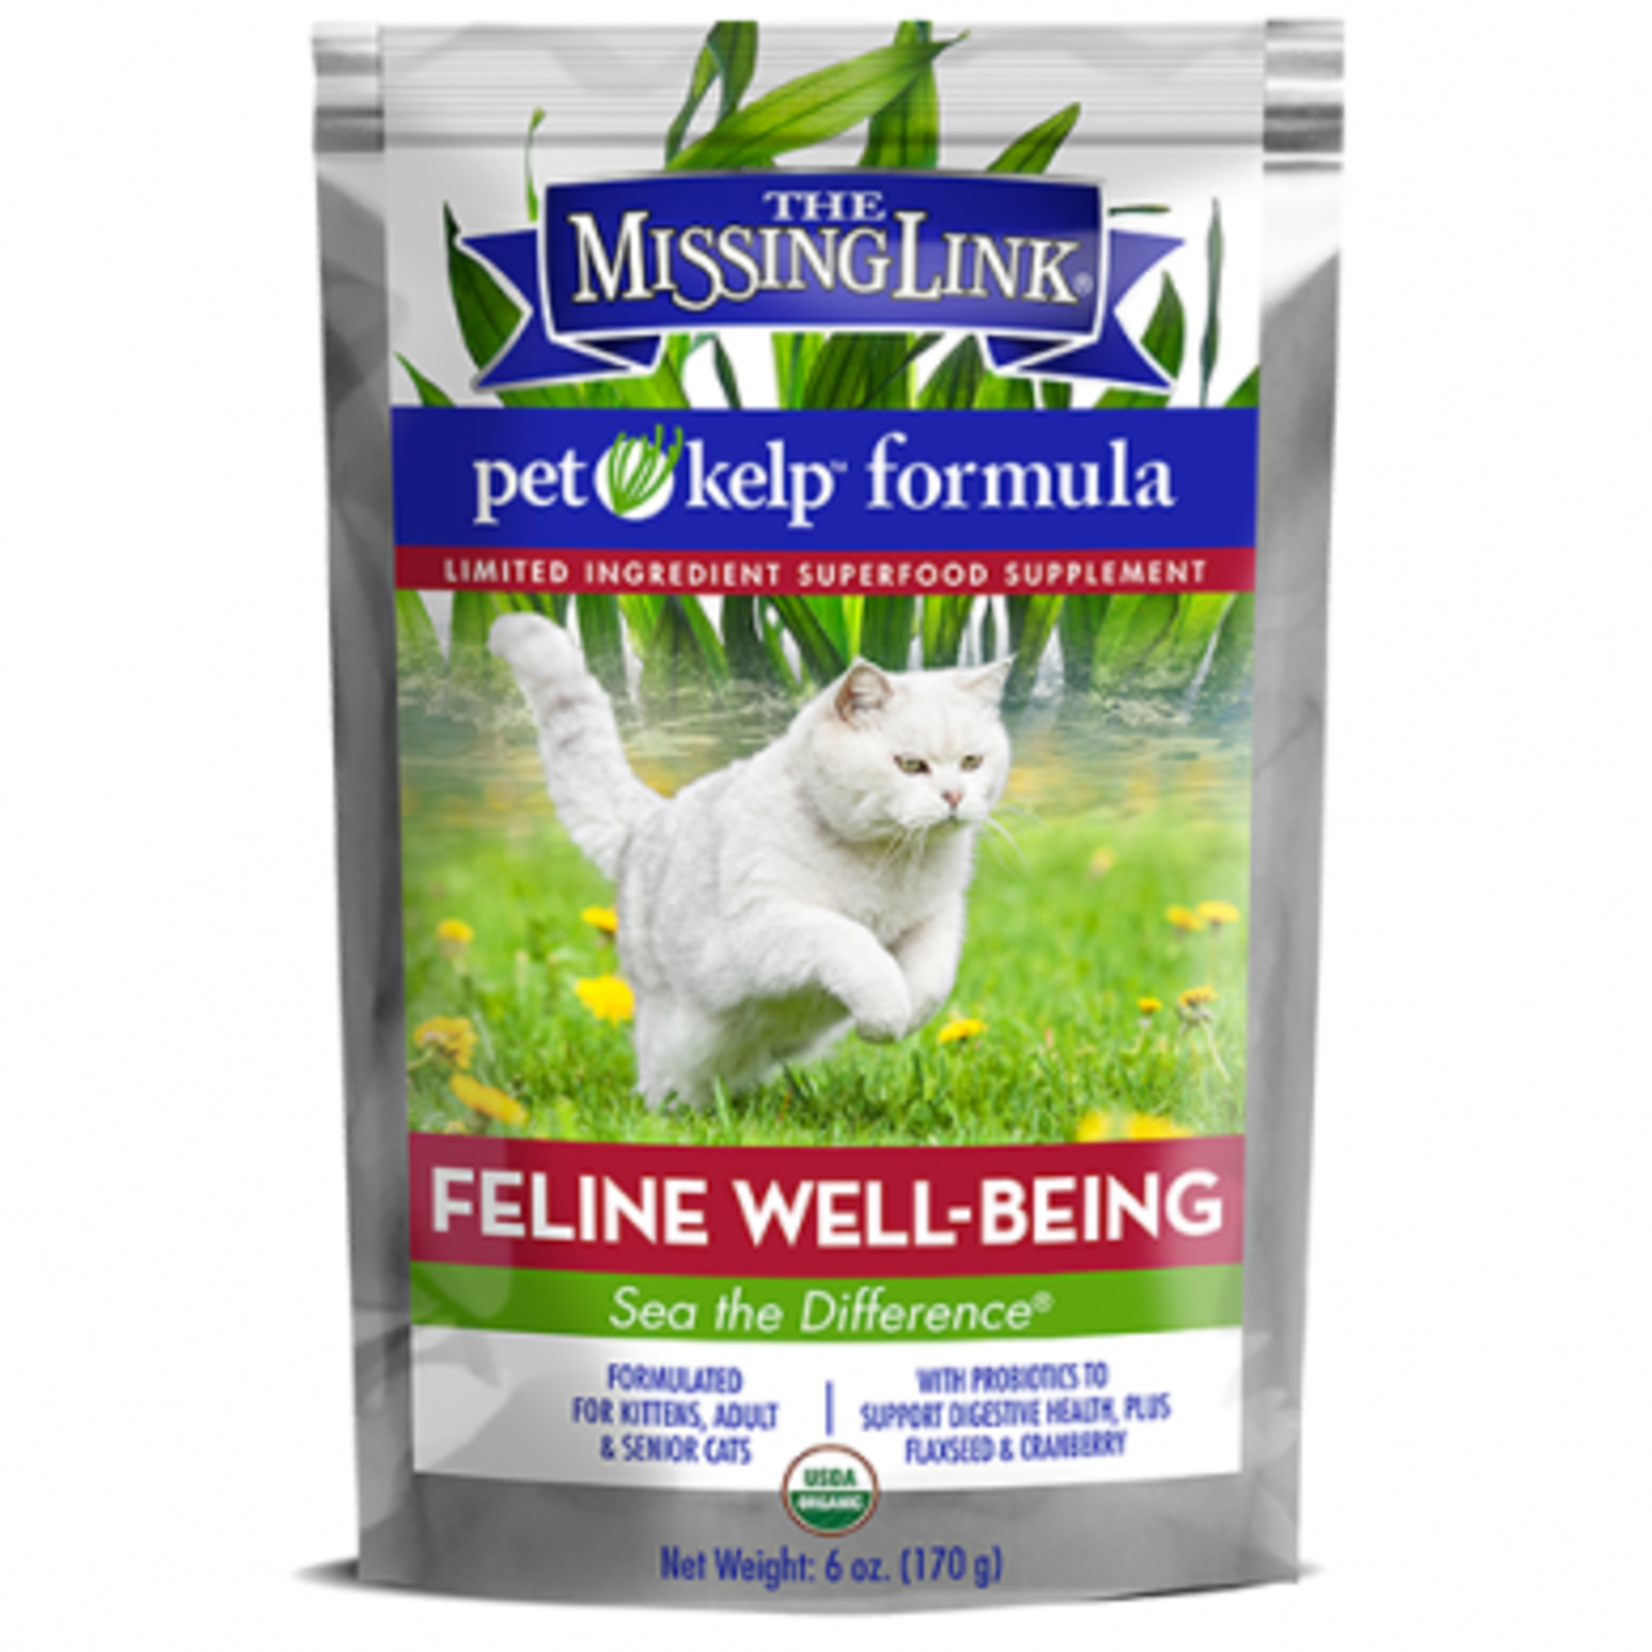 Missing Link Pet Kelp - Well-Being Formula - Organic Limited Ingredients - Superfood Supplement - 6 oz